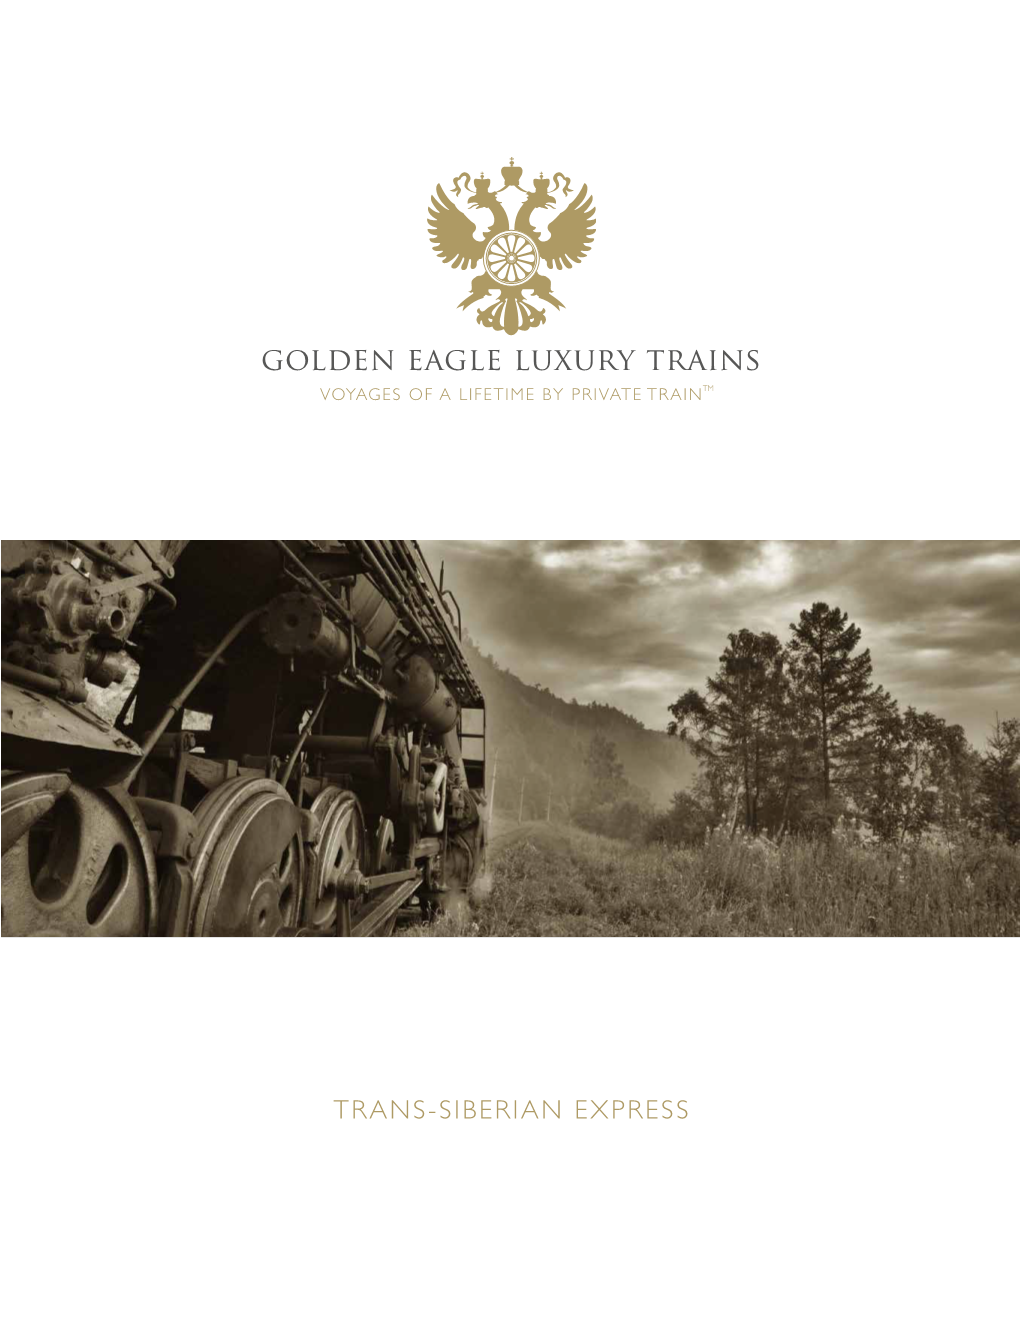 Golden Eagle Luxury Trains VOYAGES of a LIFETIME by PRIVATE TRAINTM